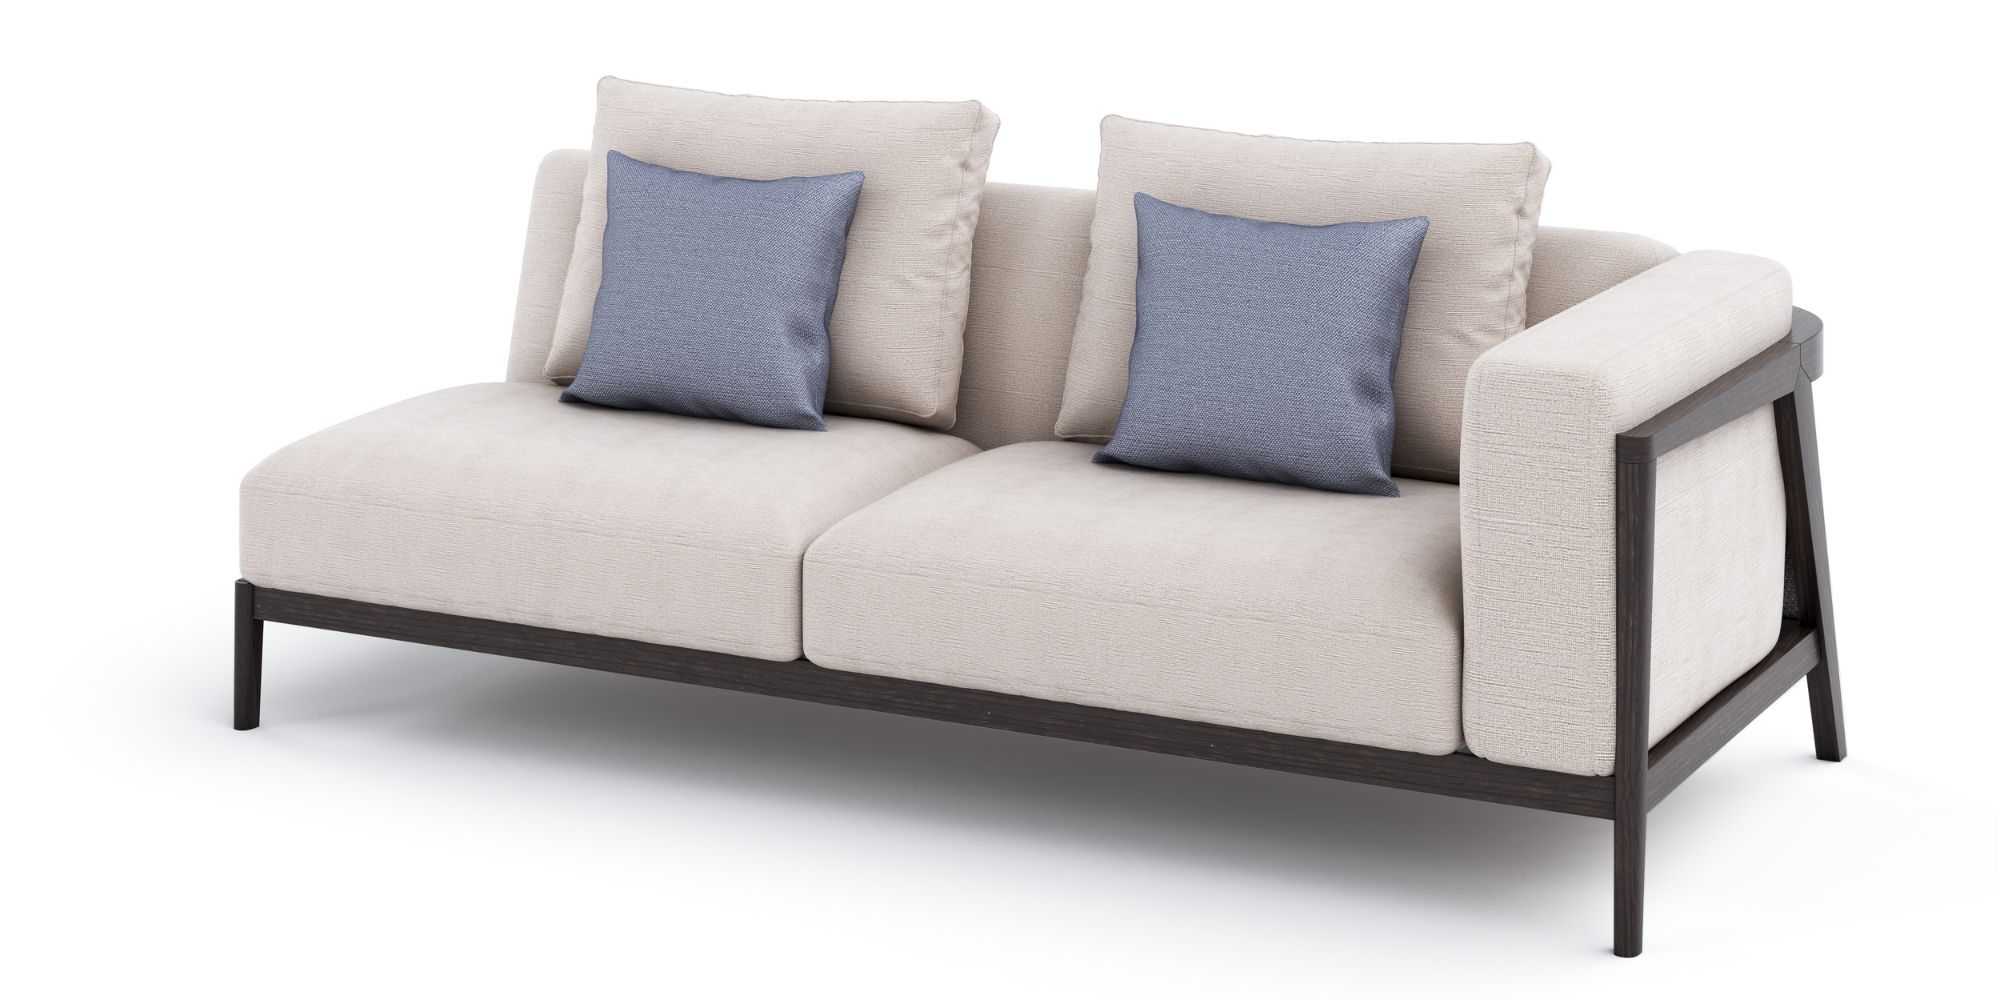 Chuchumber Left Arm End Section in Outdoor Modular Sofas for Chuchumber collection